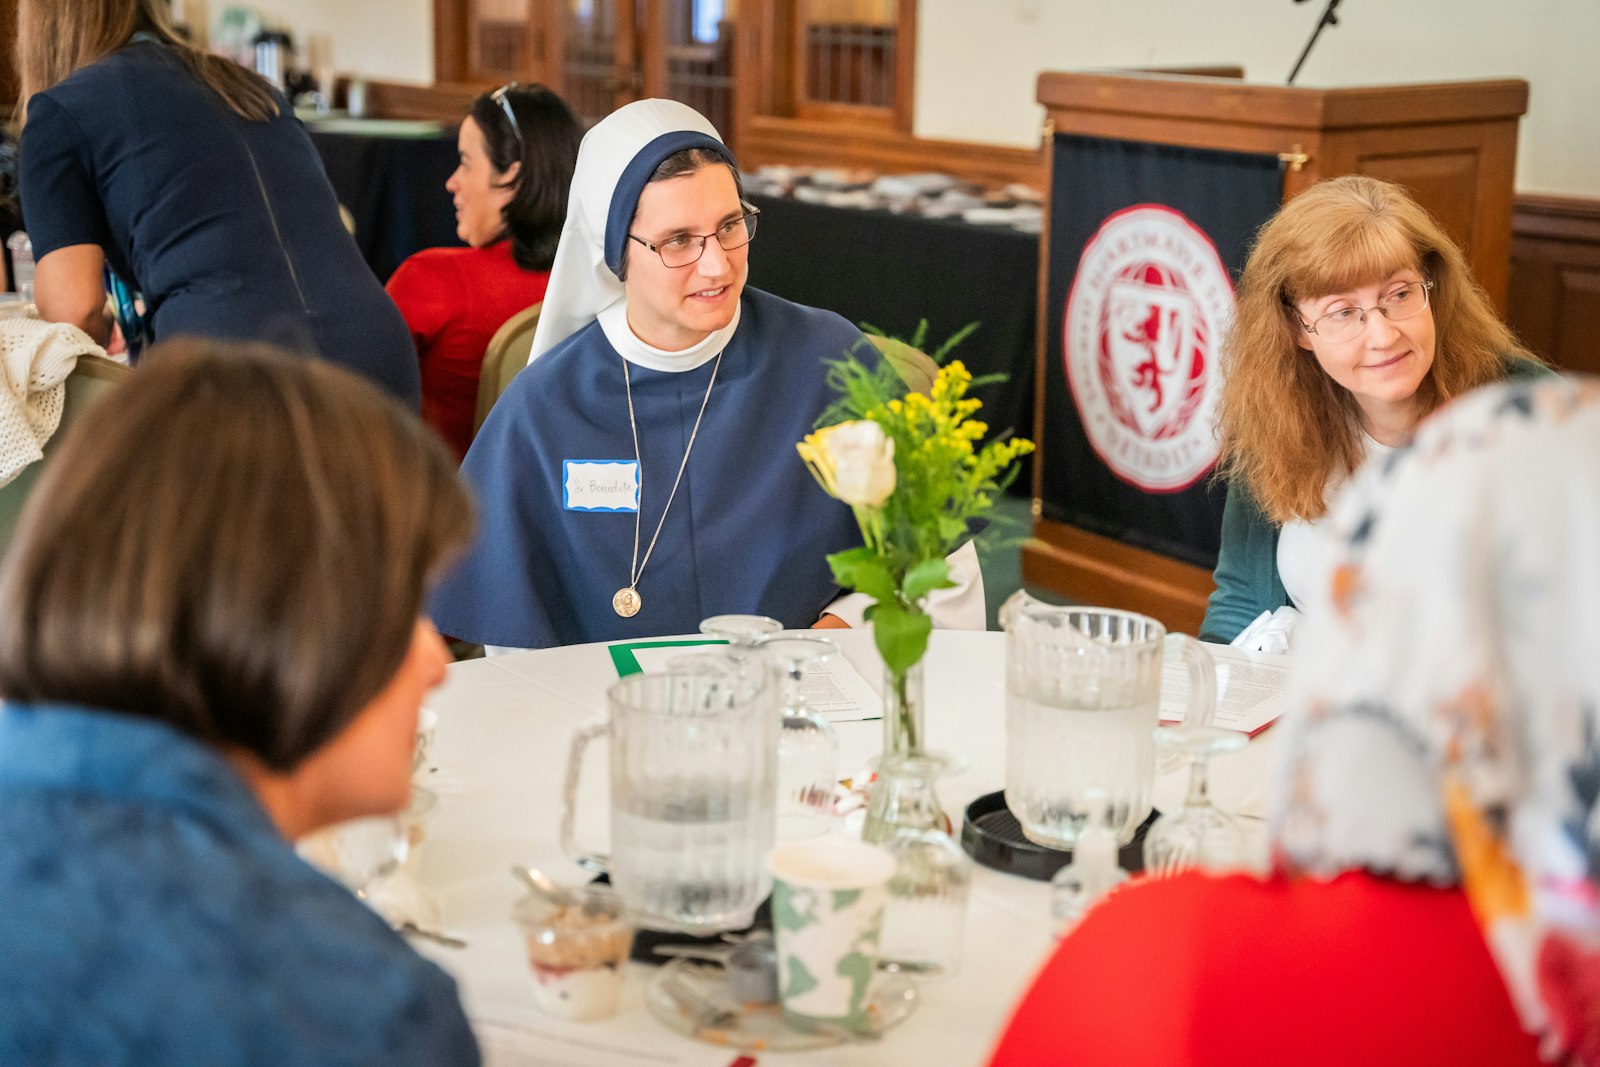 Sr. Mariana Benedicta Uribe, SV, speaks to parish leaders Oct. 2 during the Sisters of Life's presentation. The sisters also spoke Oct. 3 during a gathering of priests from the Archdiocese of Detroit at Sacred Heart Major Seminary.